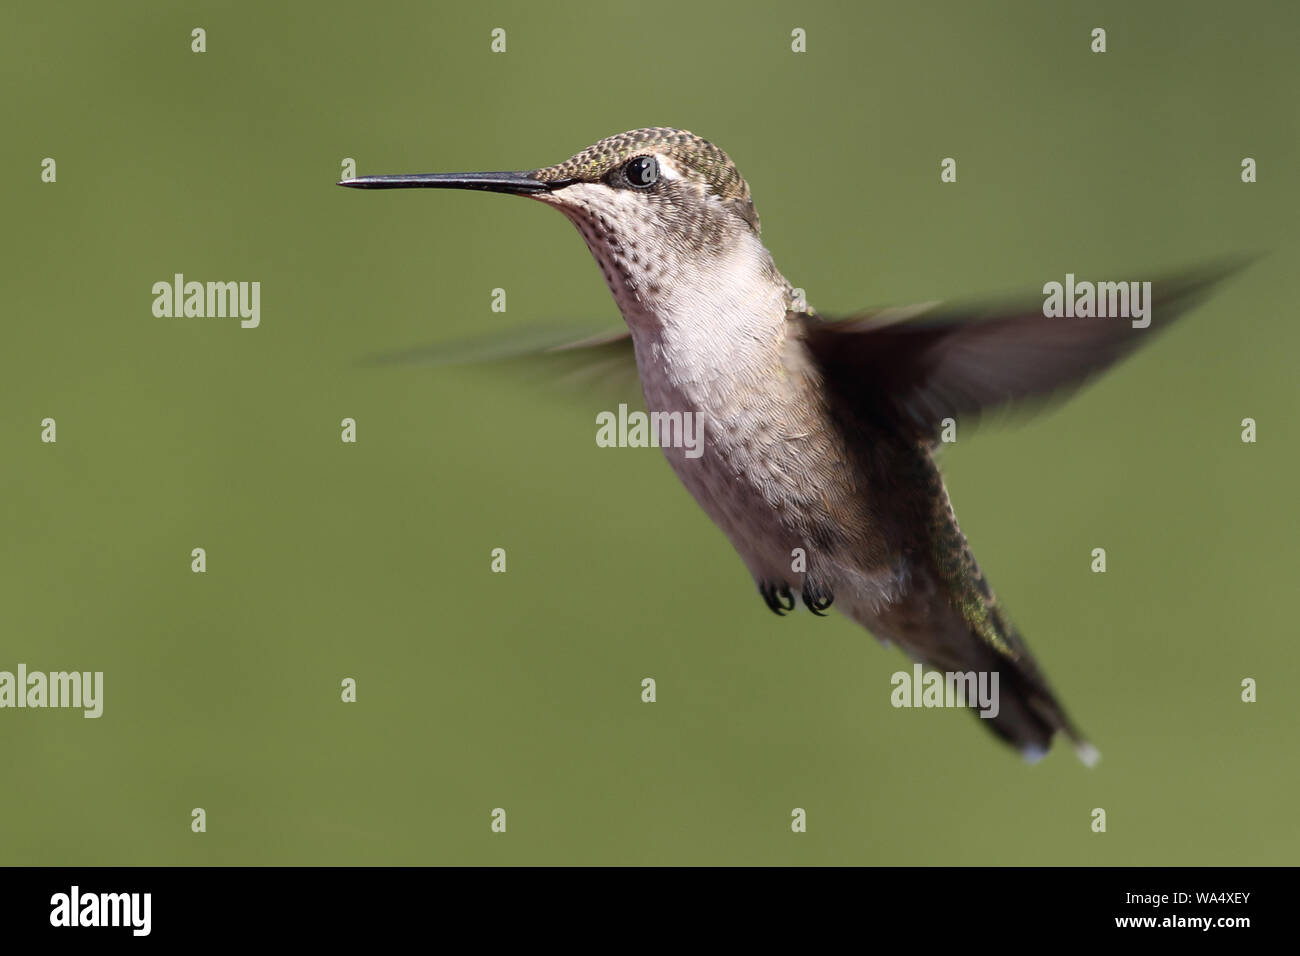 A delightful little Hummingbird hovers in mid-air Stock Photo